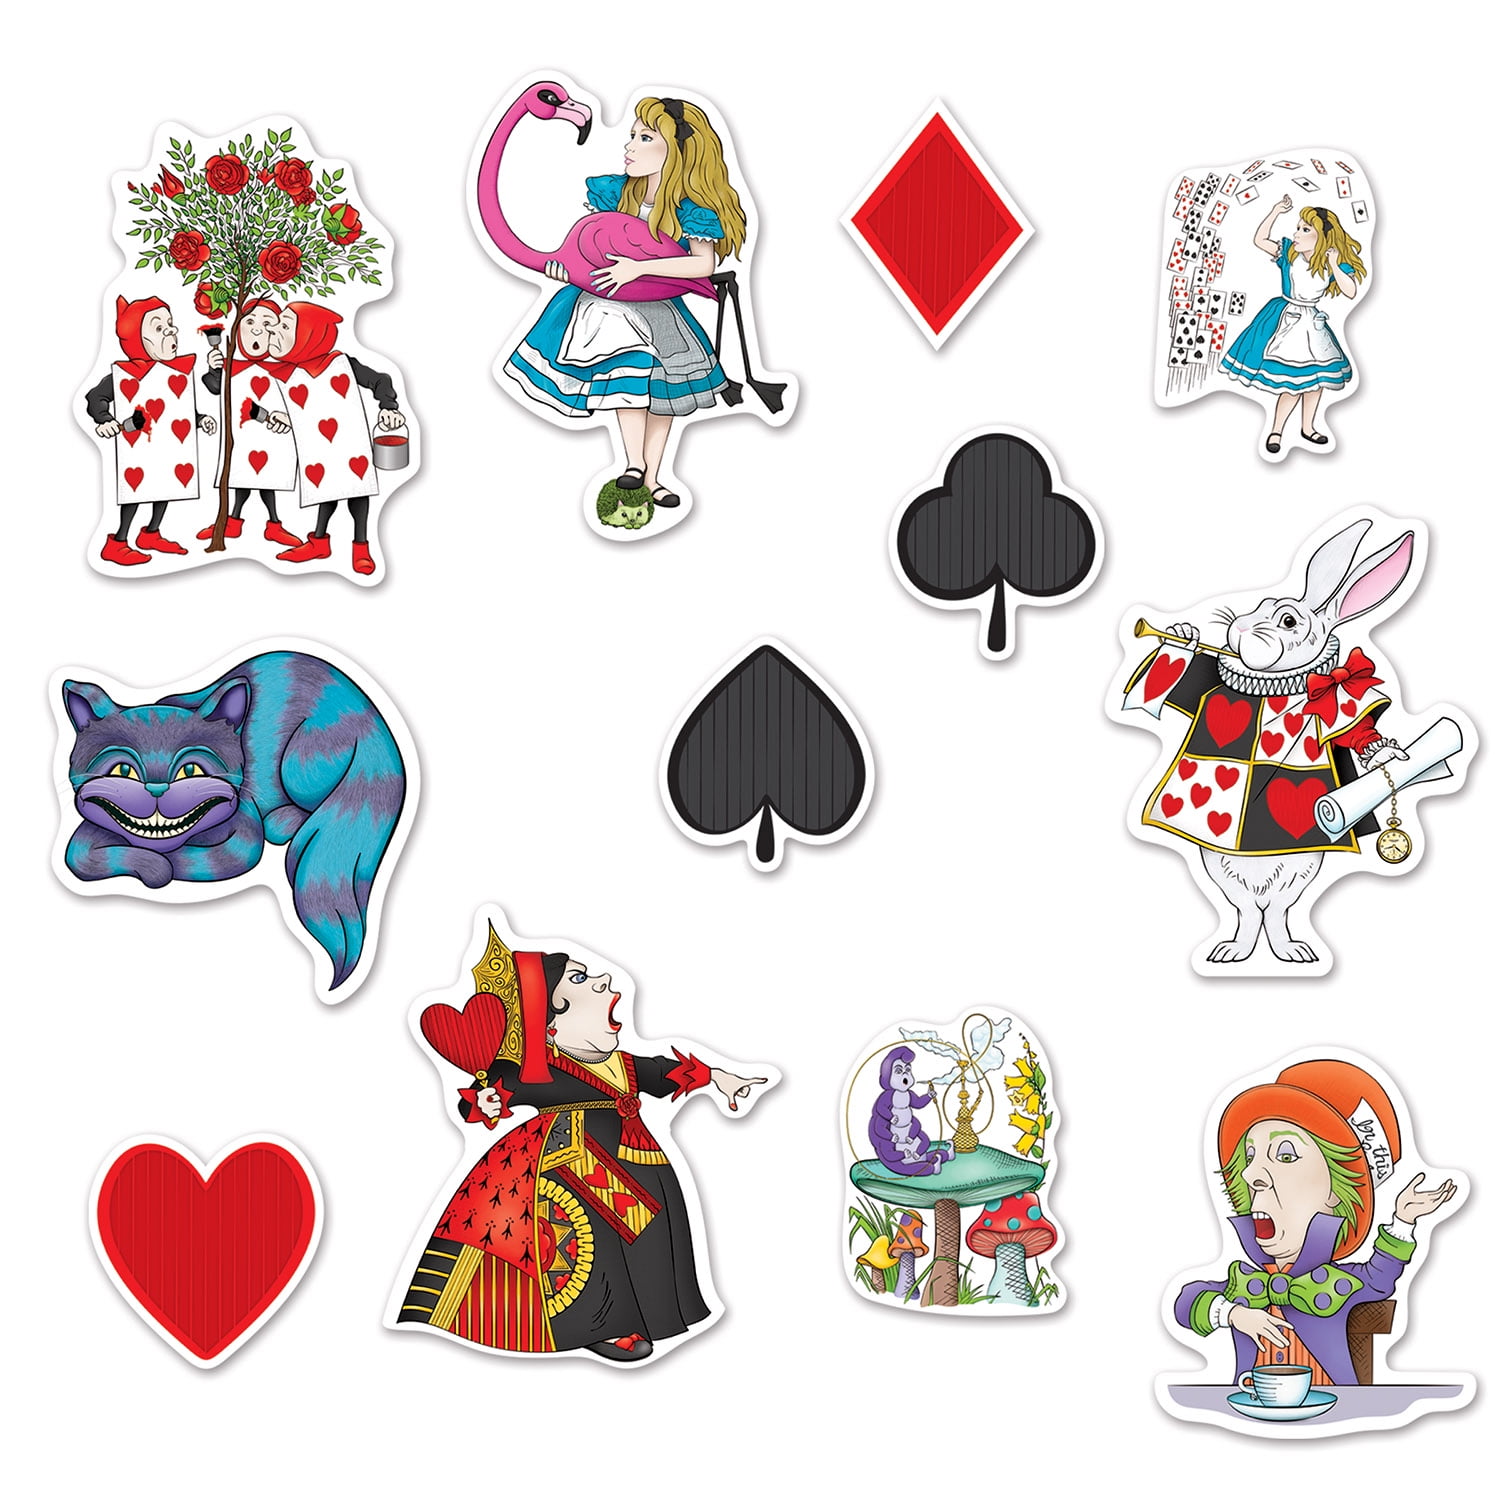 Alice in Wonderland Party Decorations & Games Printable Kit